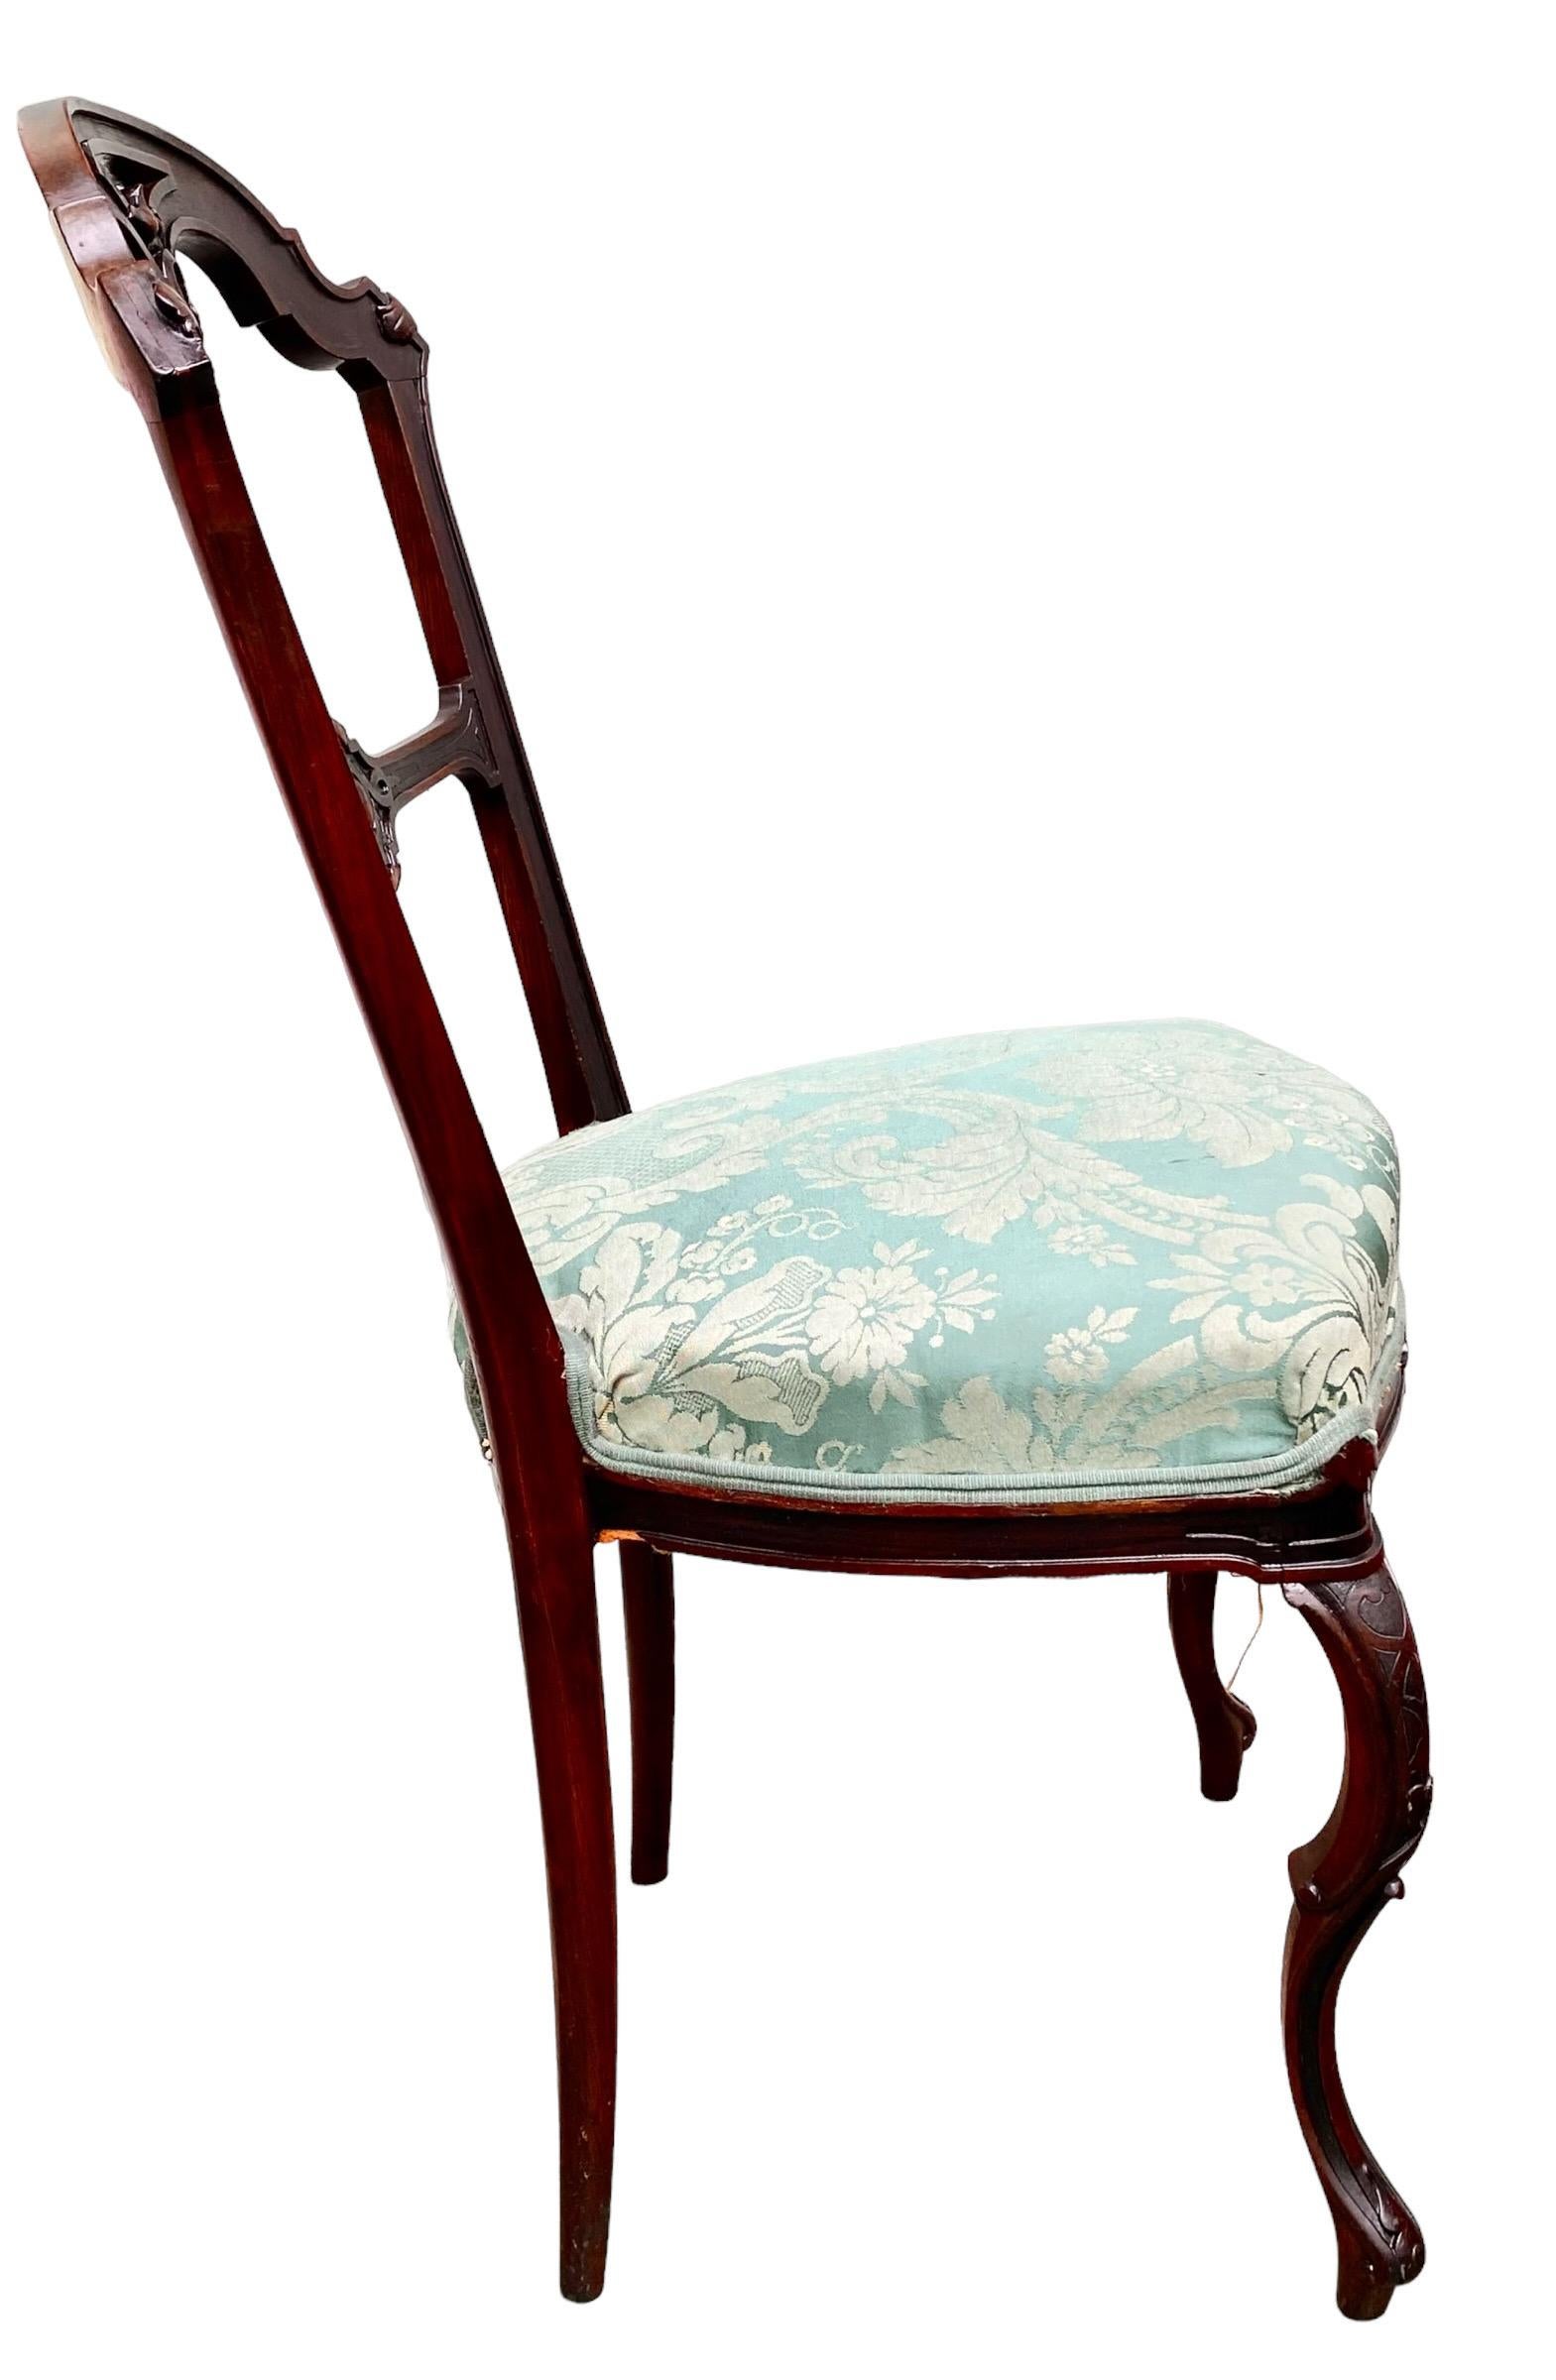 An antique, late 19th century French Belle Epoch, intricately hand carved mahogany accent/side chair, with the most graceful, double scrolled, Cabriole legs. The Belle Epoch period in France was a golden age of great prosperity, beauty and pride.